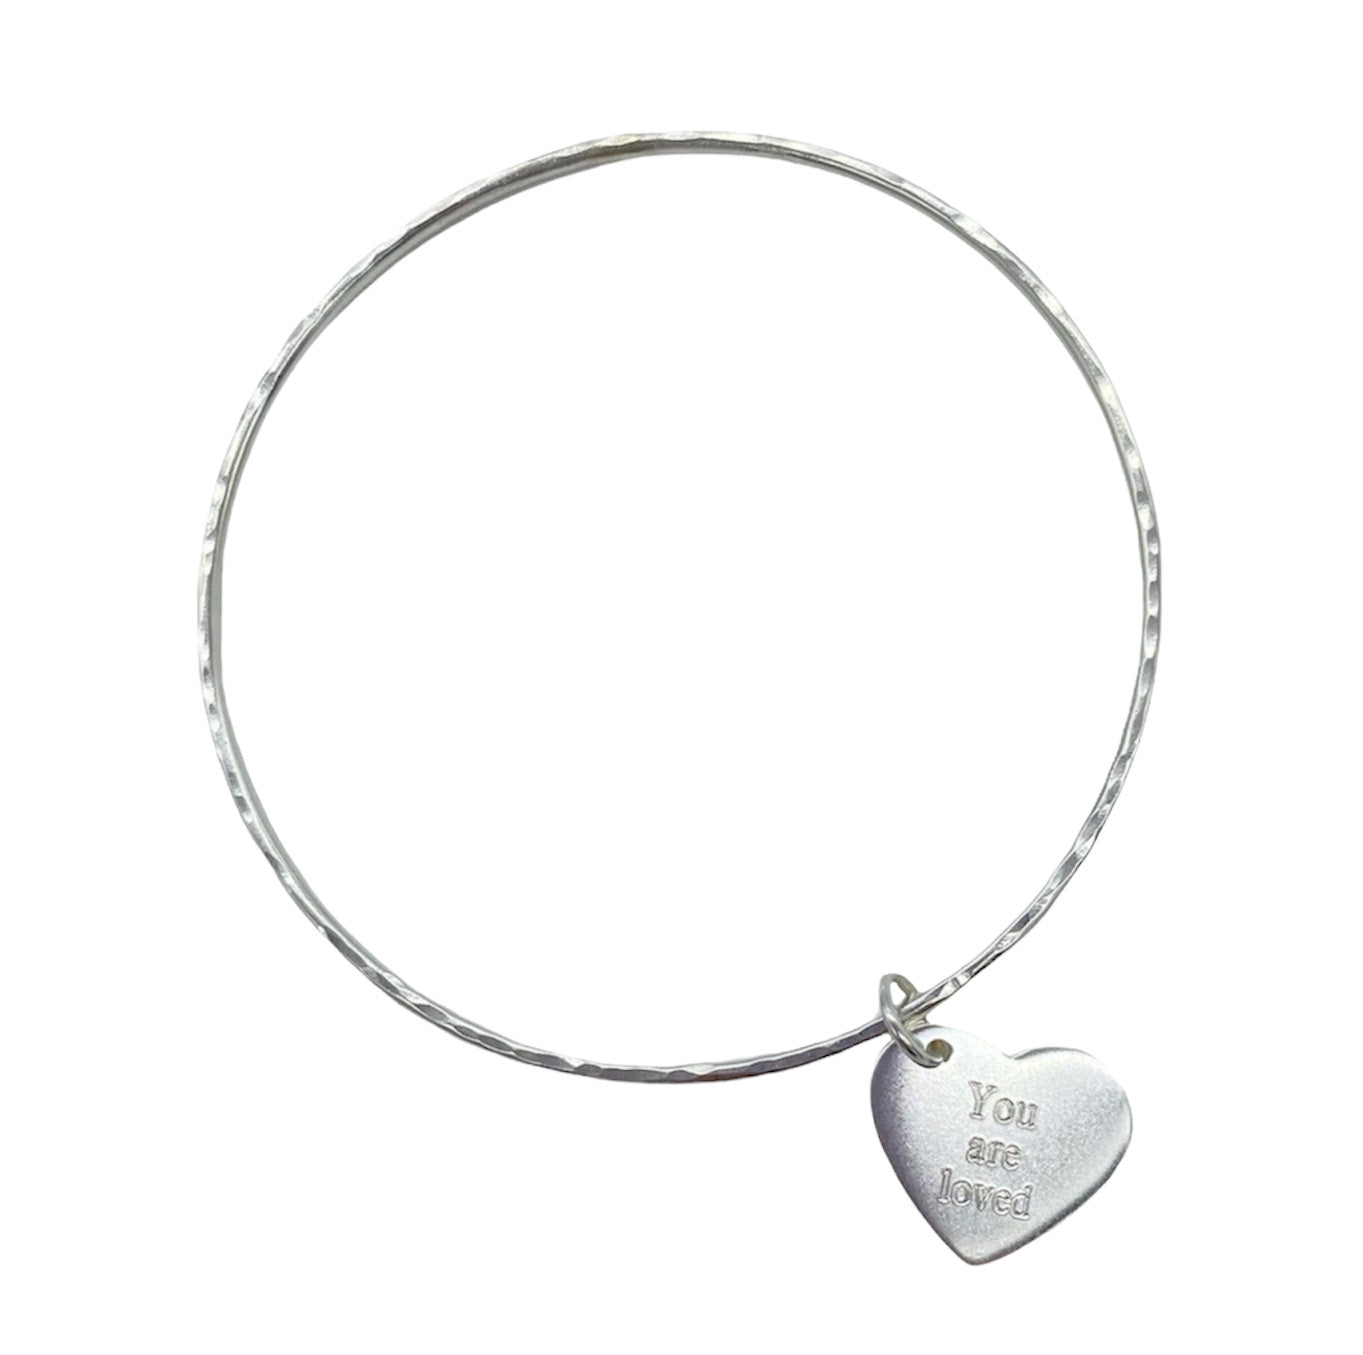 Belle & Bee You are Loved bangle